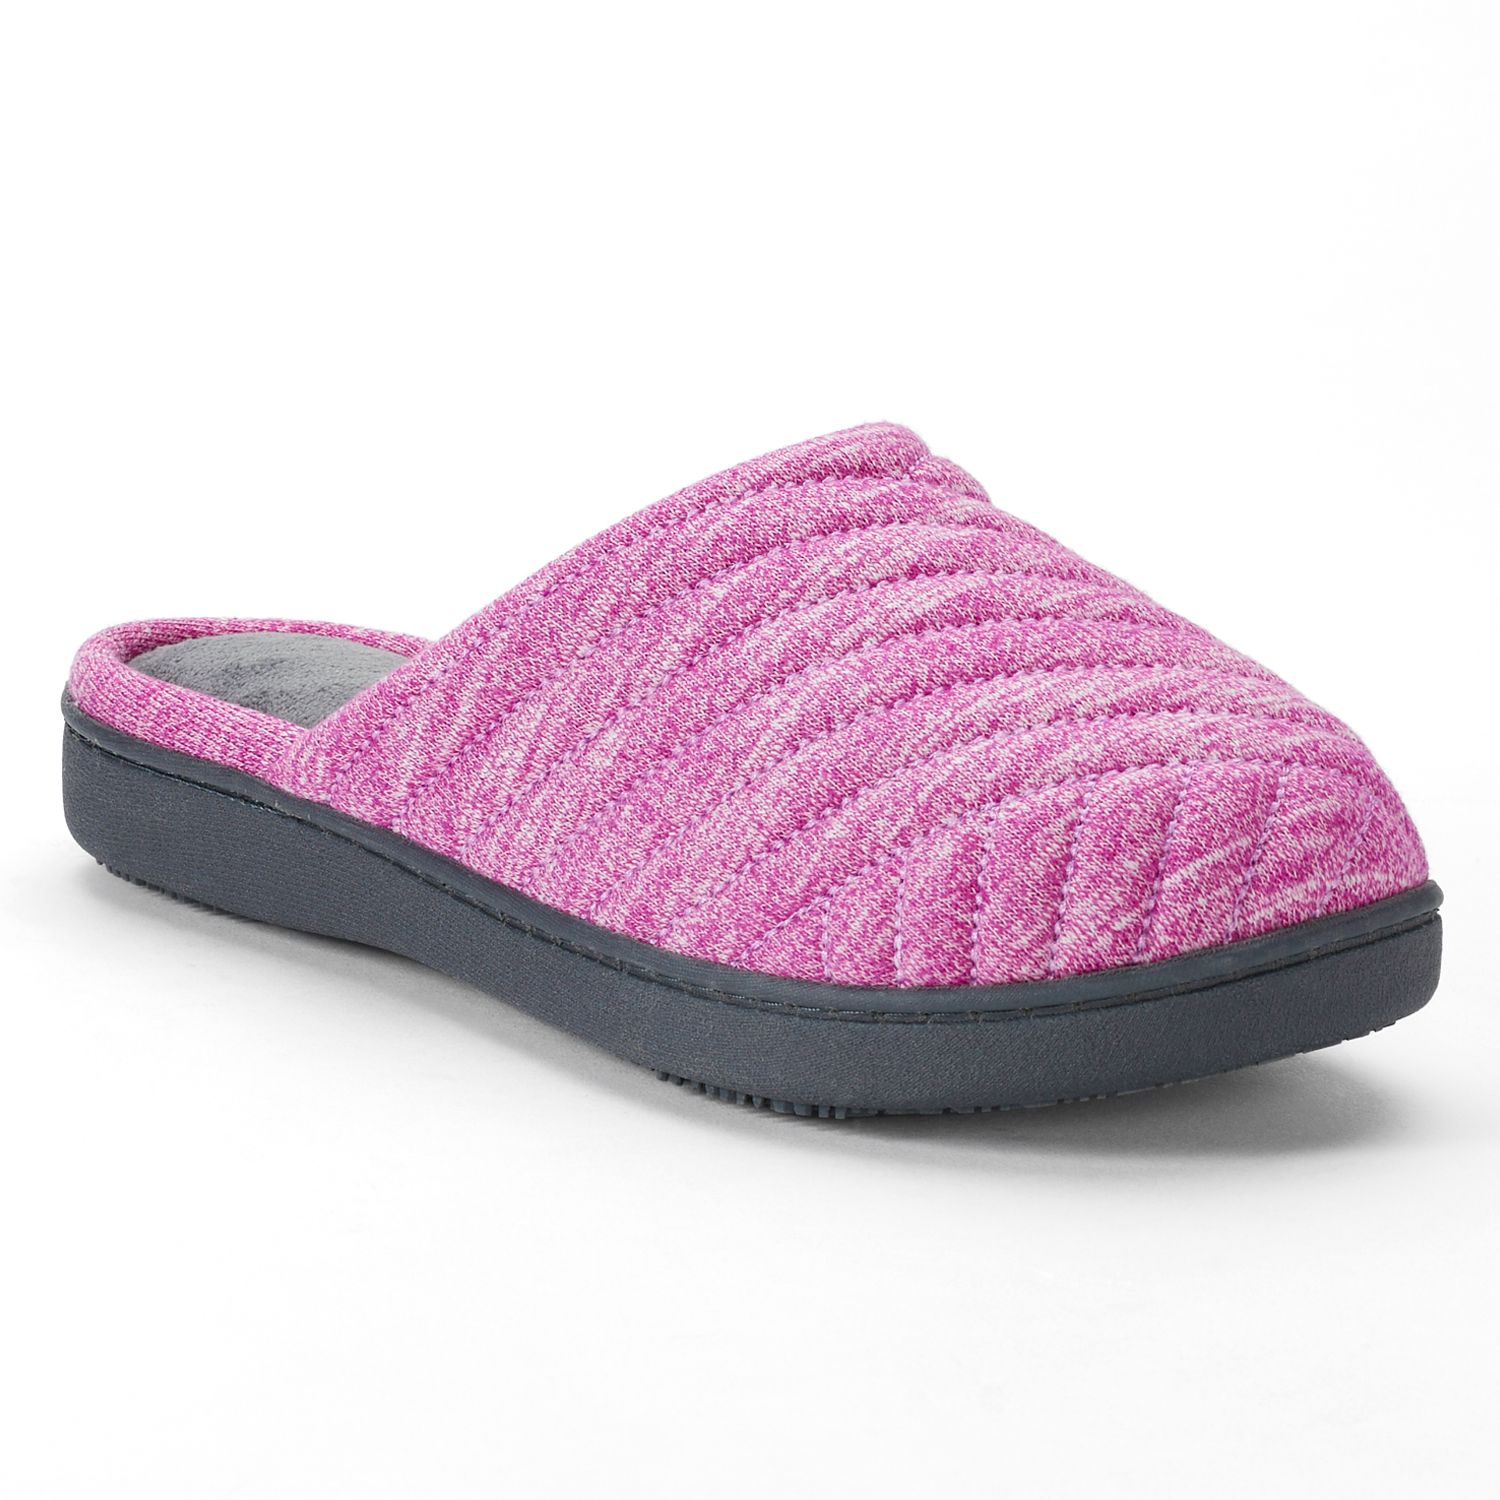 house slippers at kohl's